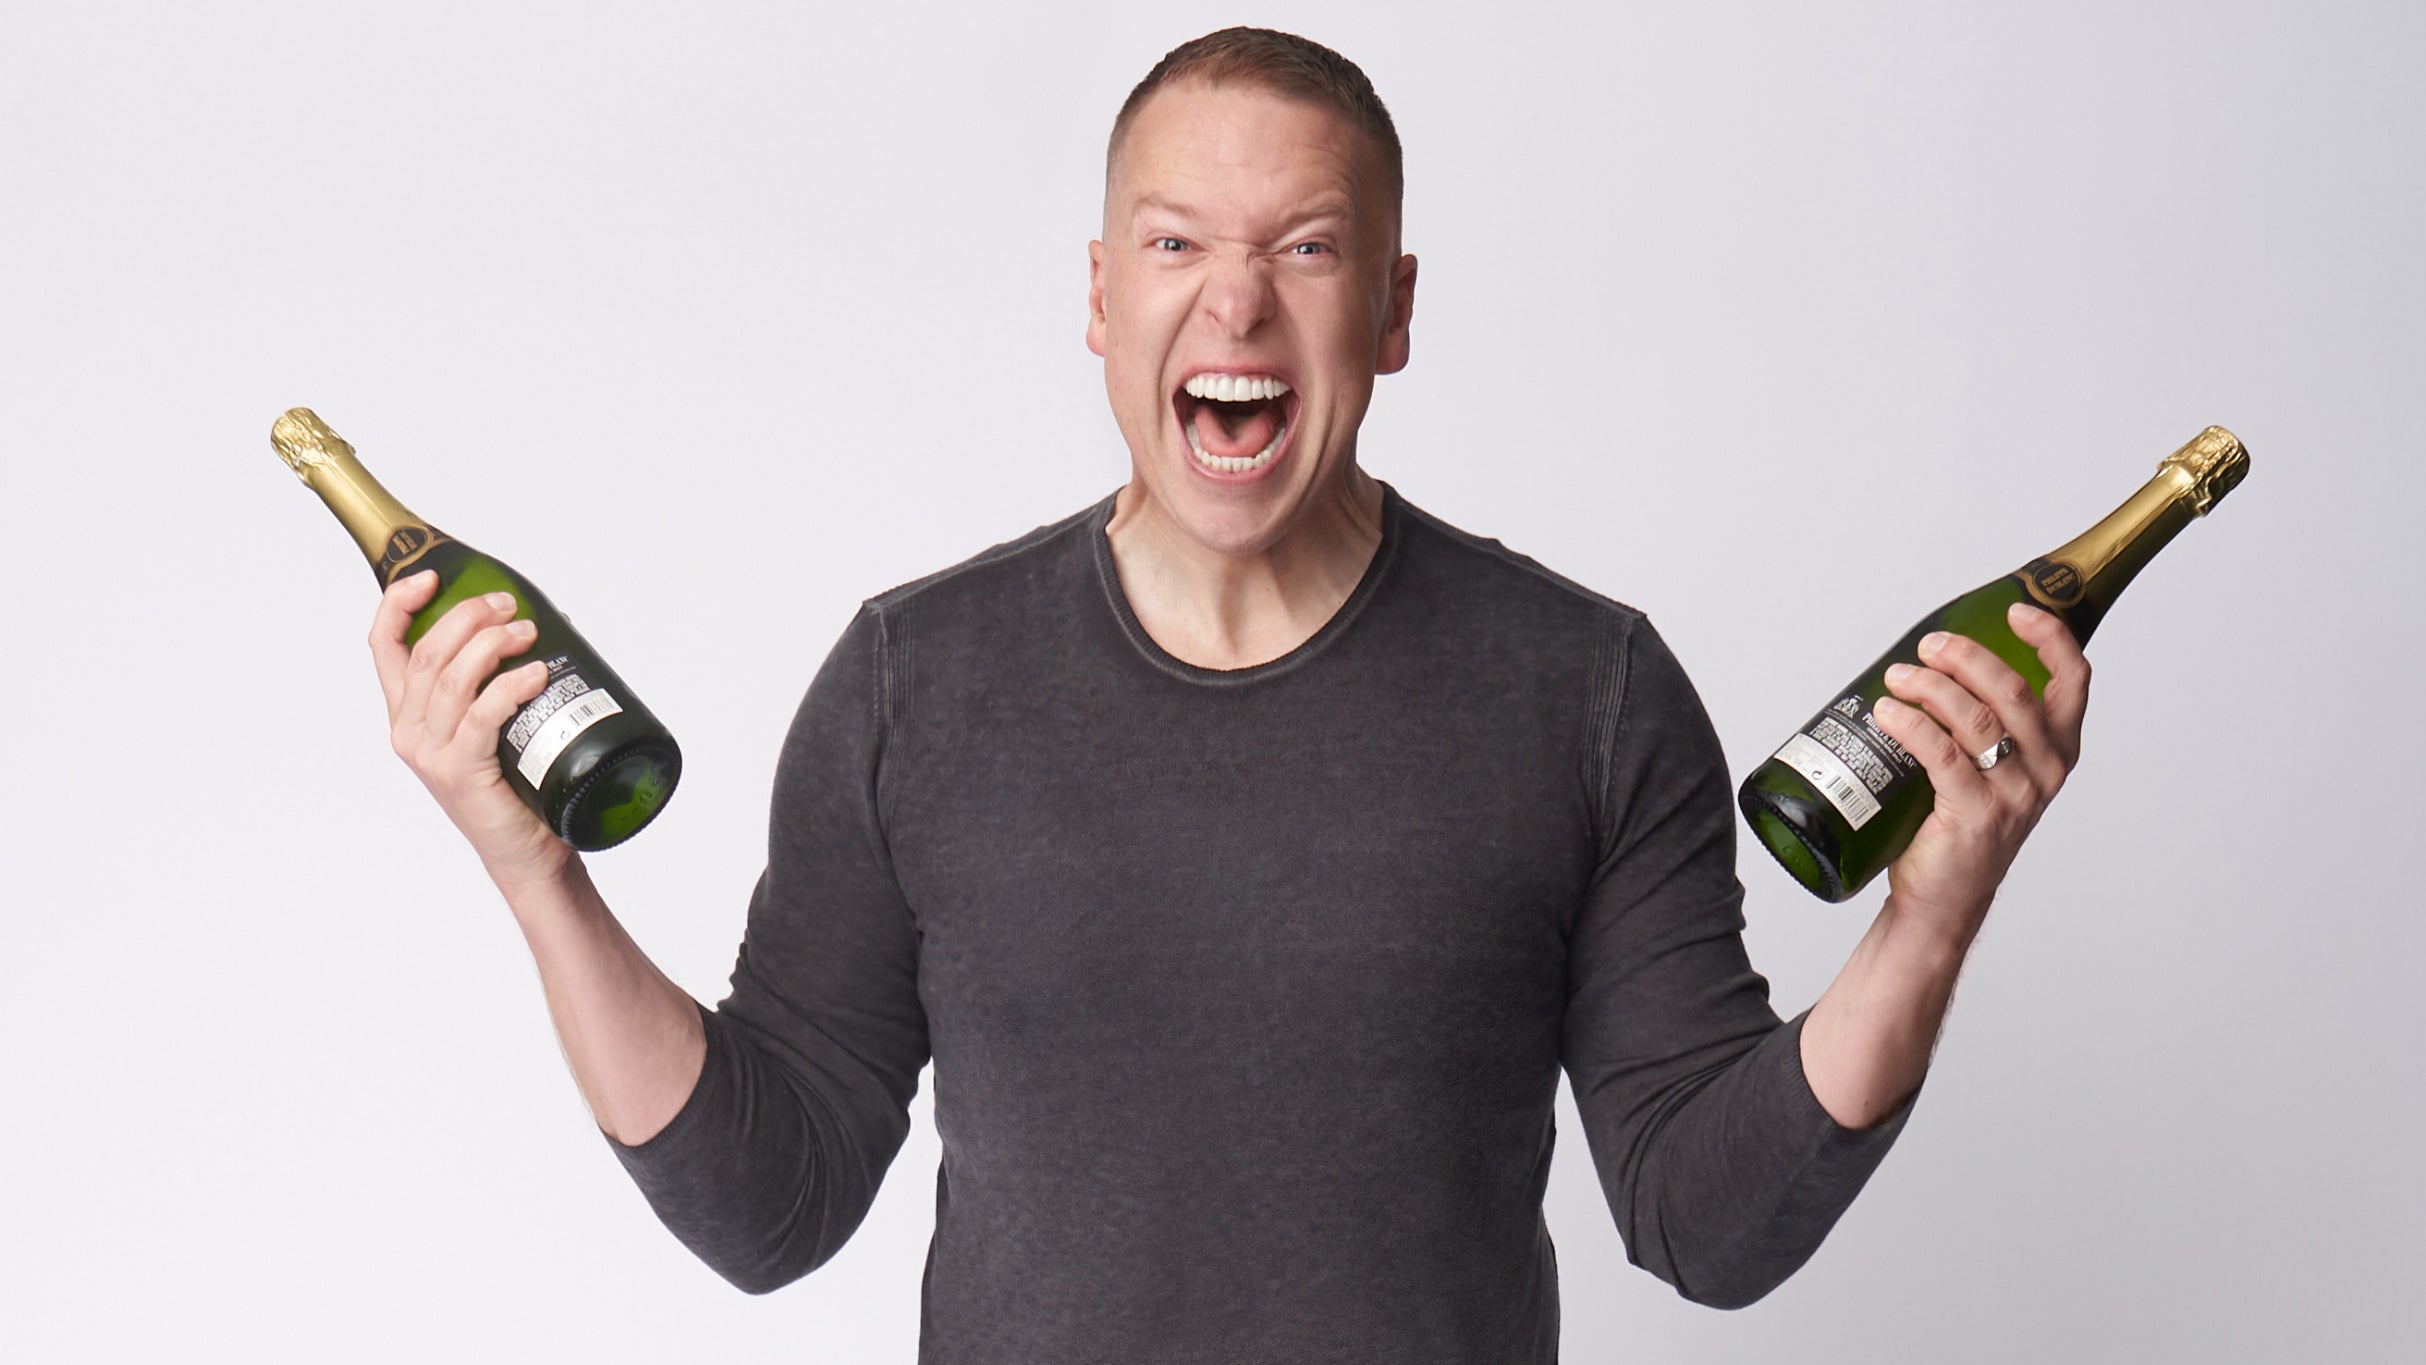 Gary Owen presale password for approved tickets in Las Vegas